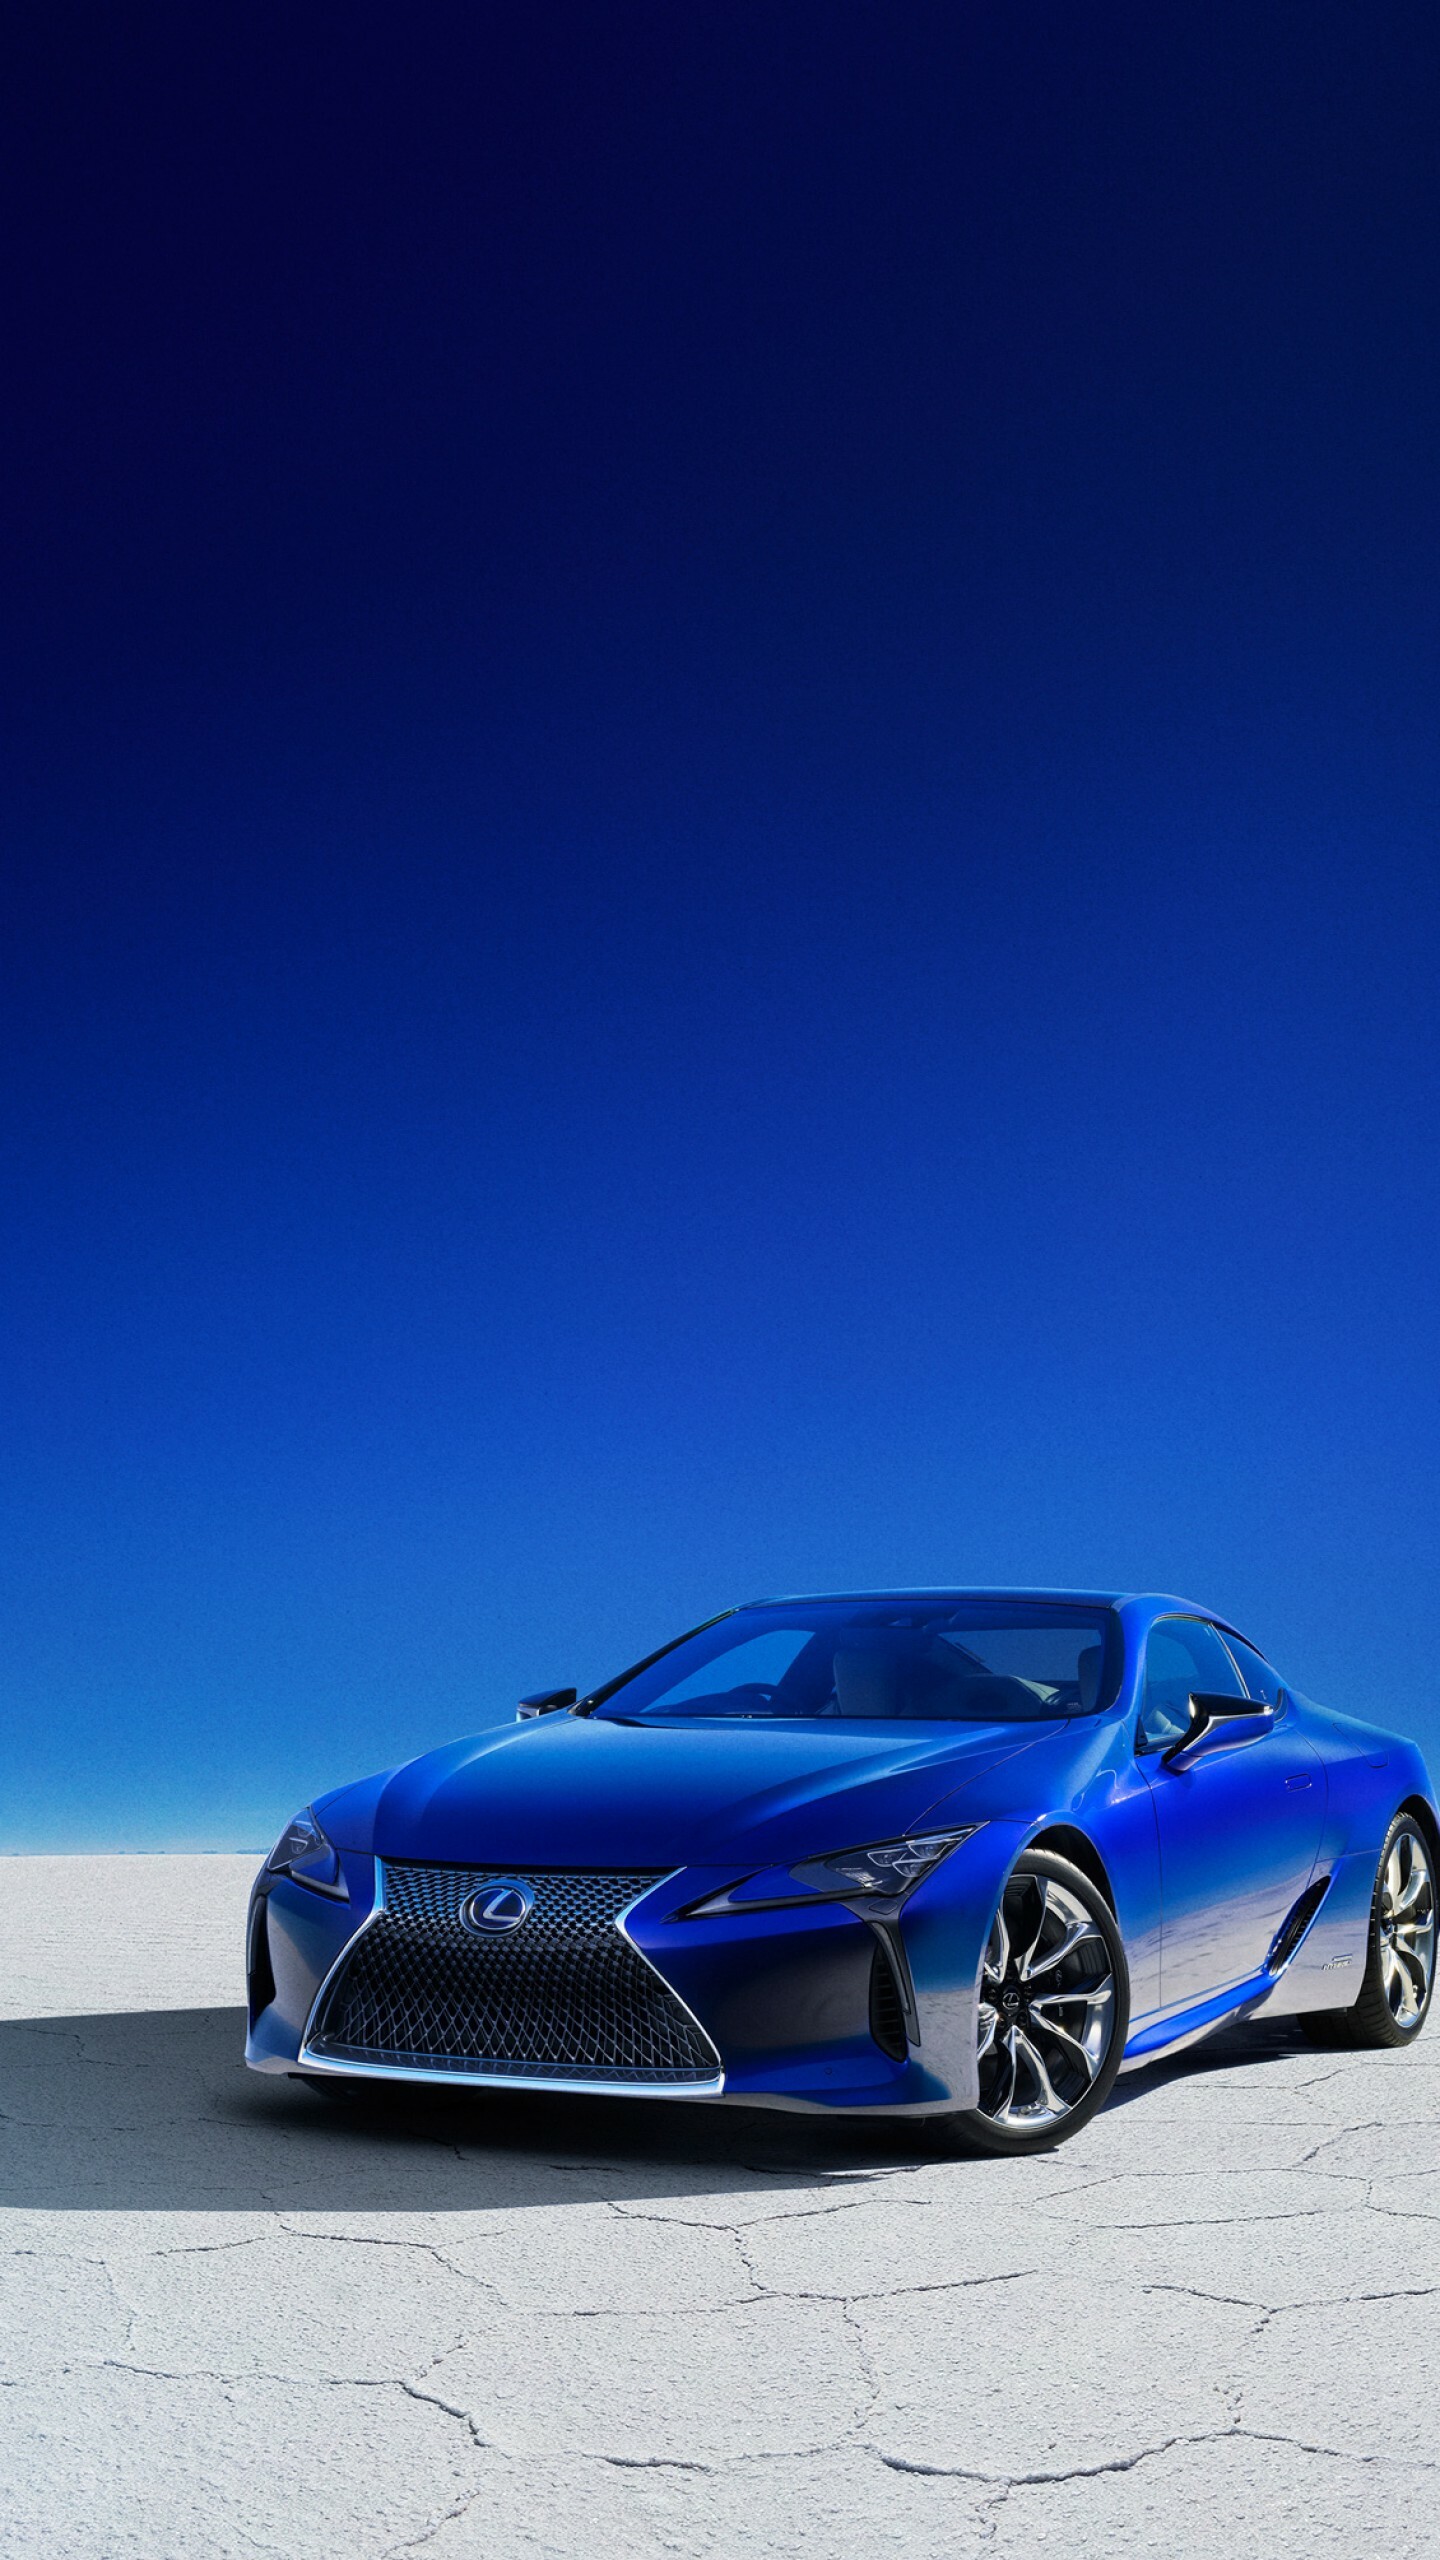 Lexus: The LC 500h, A V6 3.5-liter direct injection engine, Spindle grille. 1440x2560 HD Wallpaper.